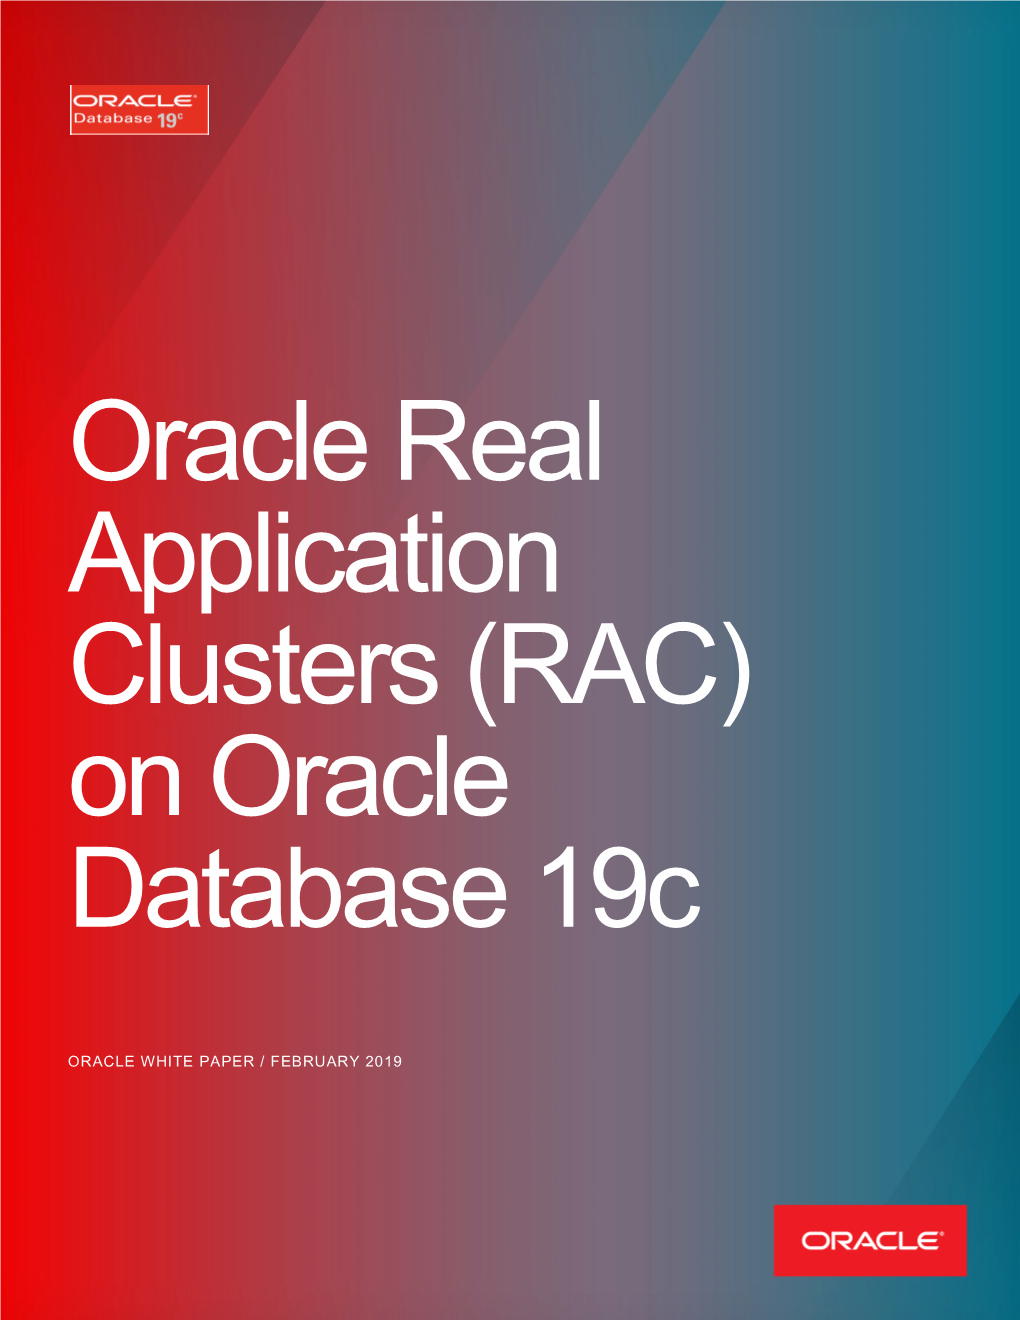 Oracle Real Application Clusters on Oracle Database 19C